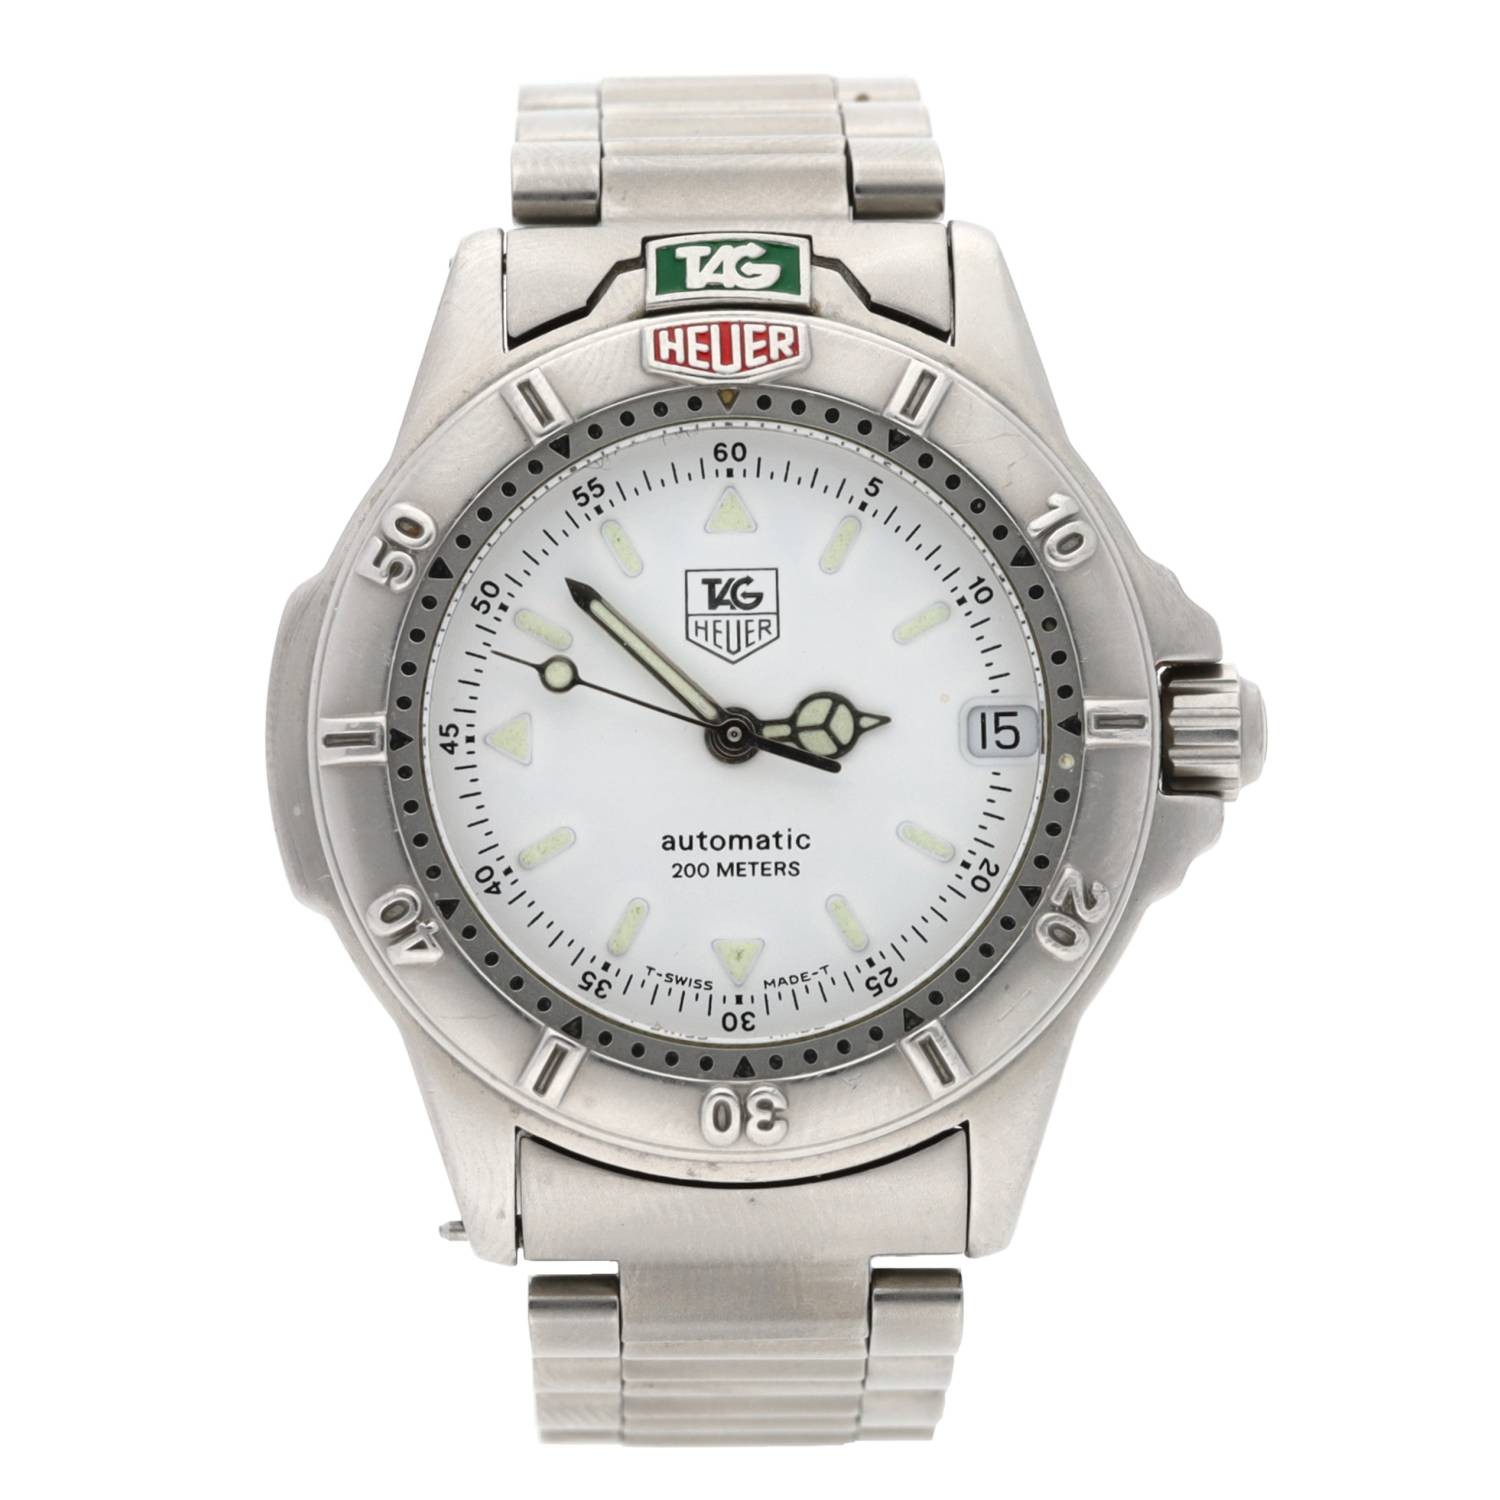 Tag Heuer 4000 Series automatic mid-size stainless steel gentleman's wristwatch, reference no. 699.